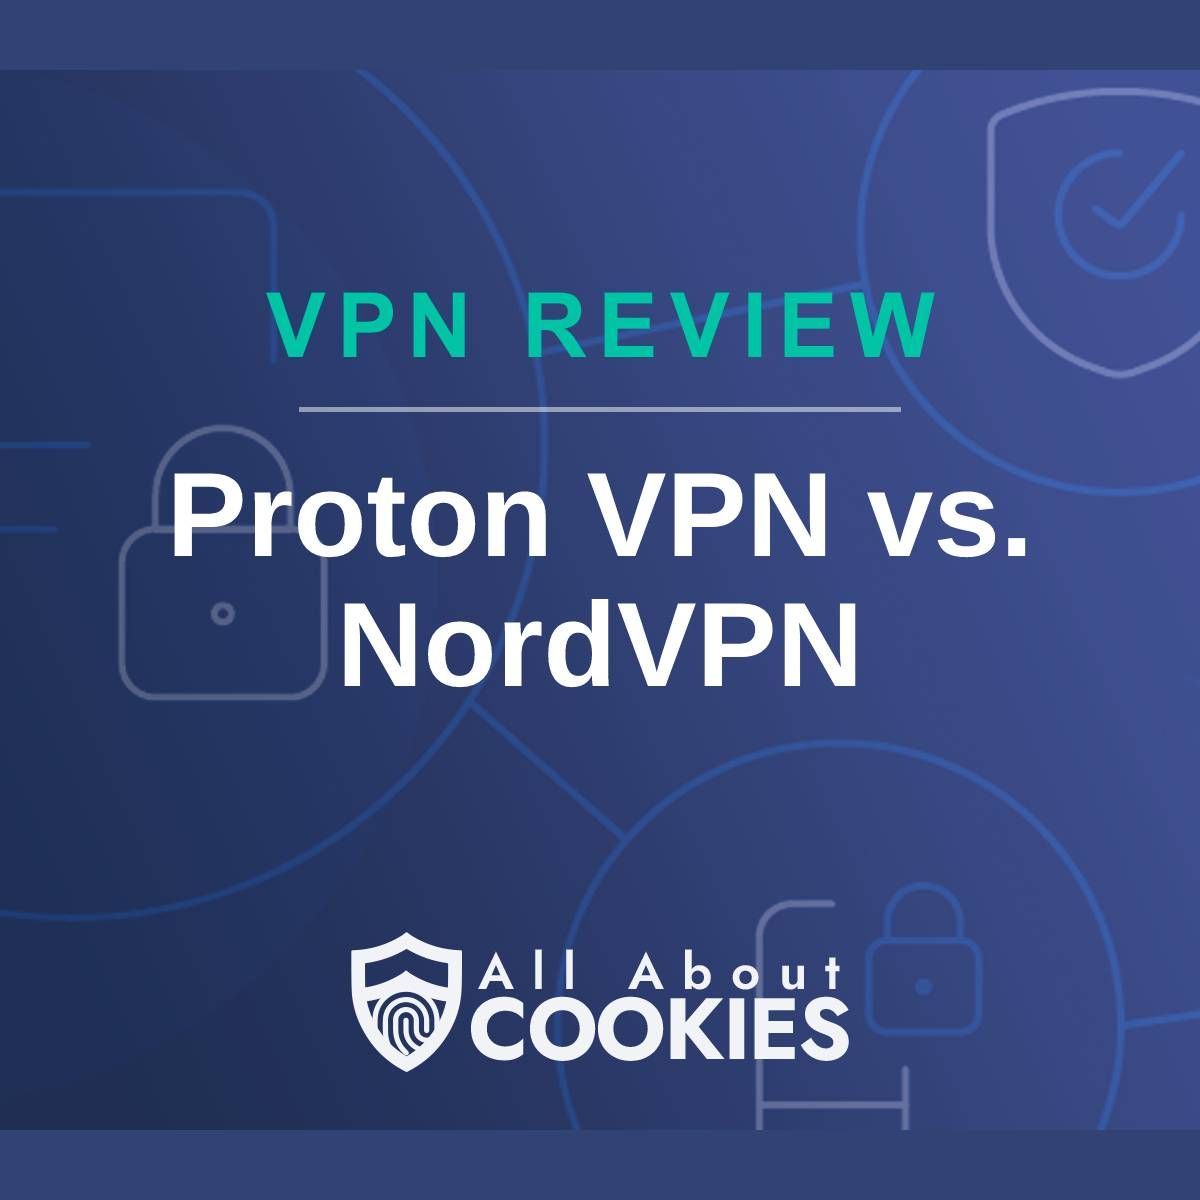 A blue background with images of locks and shields with the text &quot;VPN ReviewProton VPN vs. NordVPN&quot; and the All About Cookies logo. 